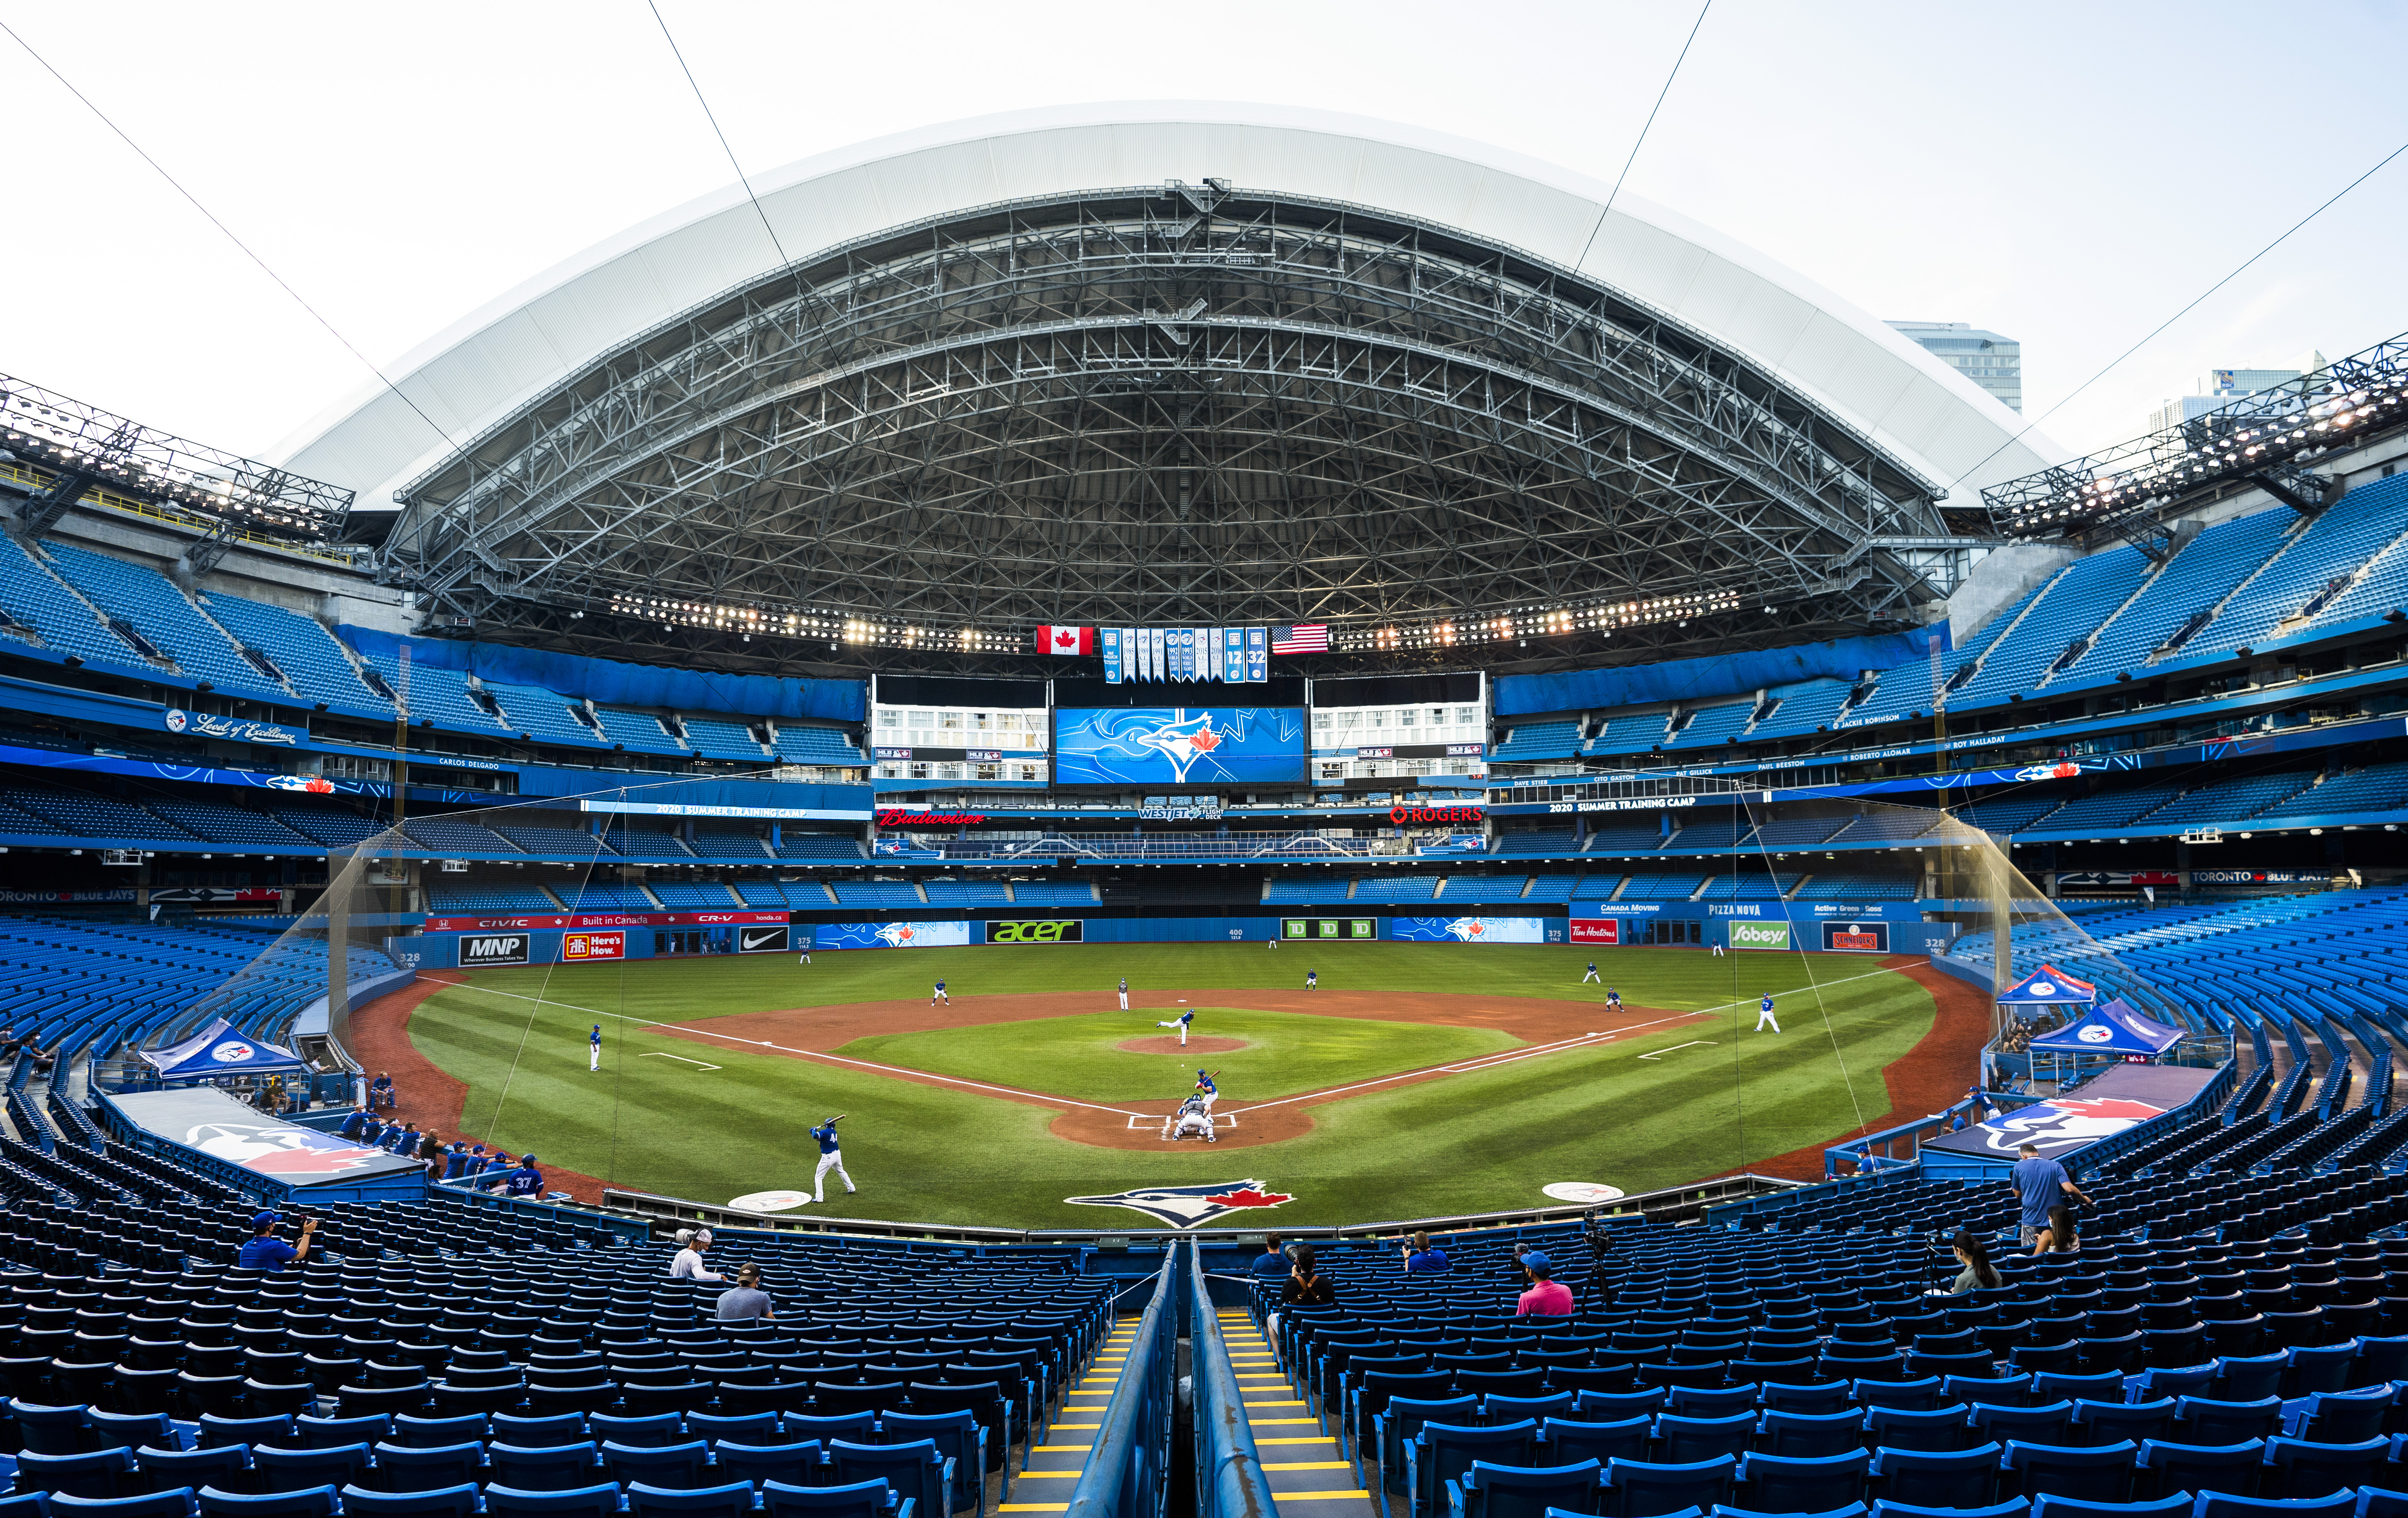 Toronto Blue Jays players take part in an intrasquad game at Rogers Centre on July 9, 2020 in Toronto, Canada